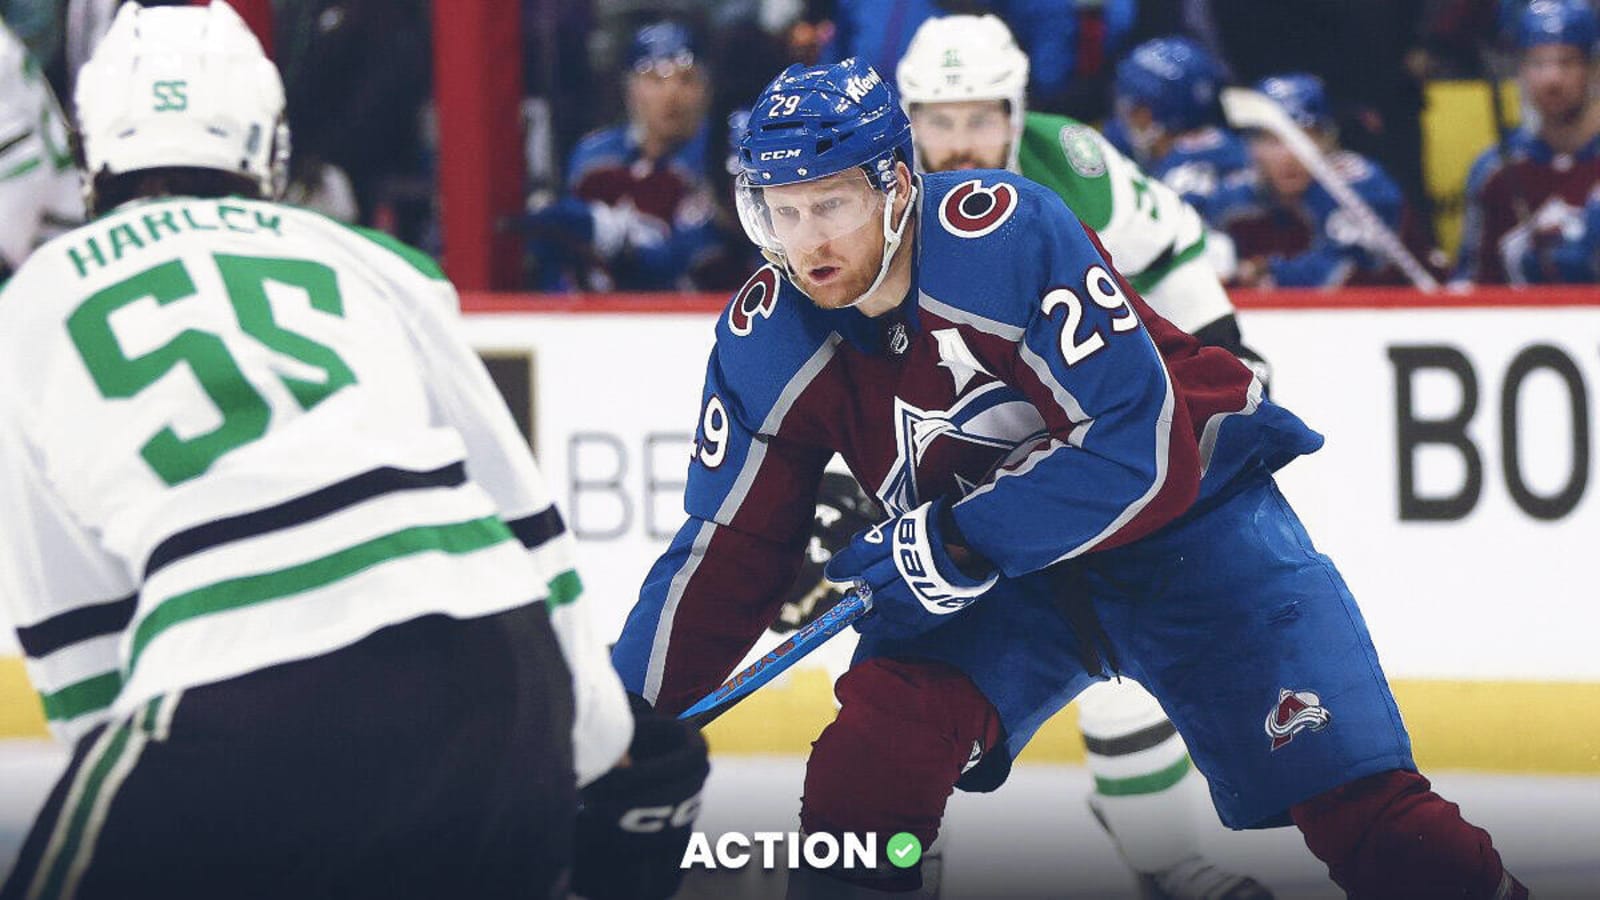 Avalanche vs. Stars Game 5 odds, preview, pick for Wed. 5/15: The Over's looking tasty